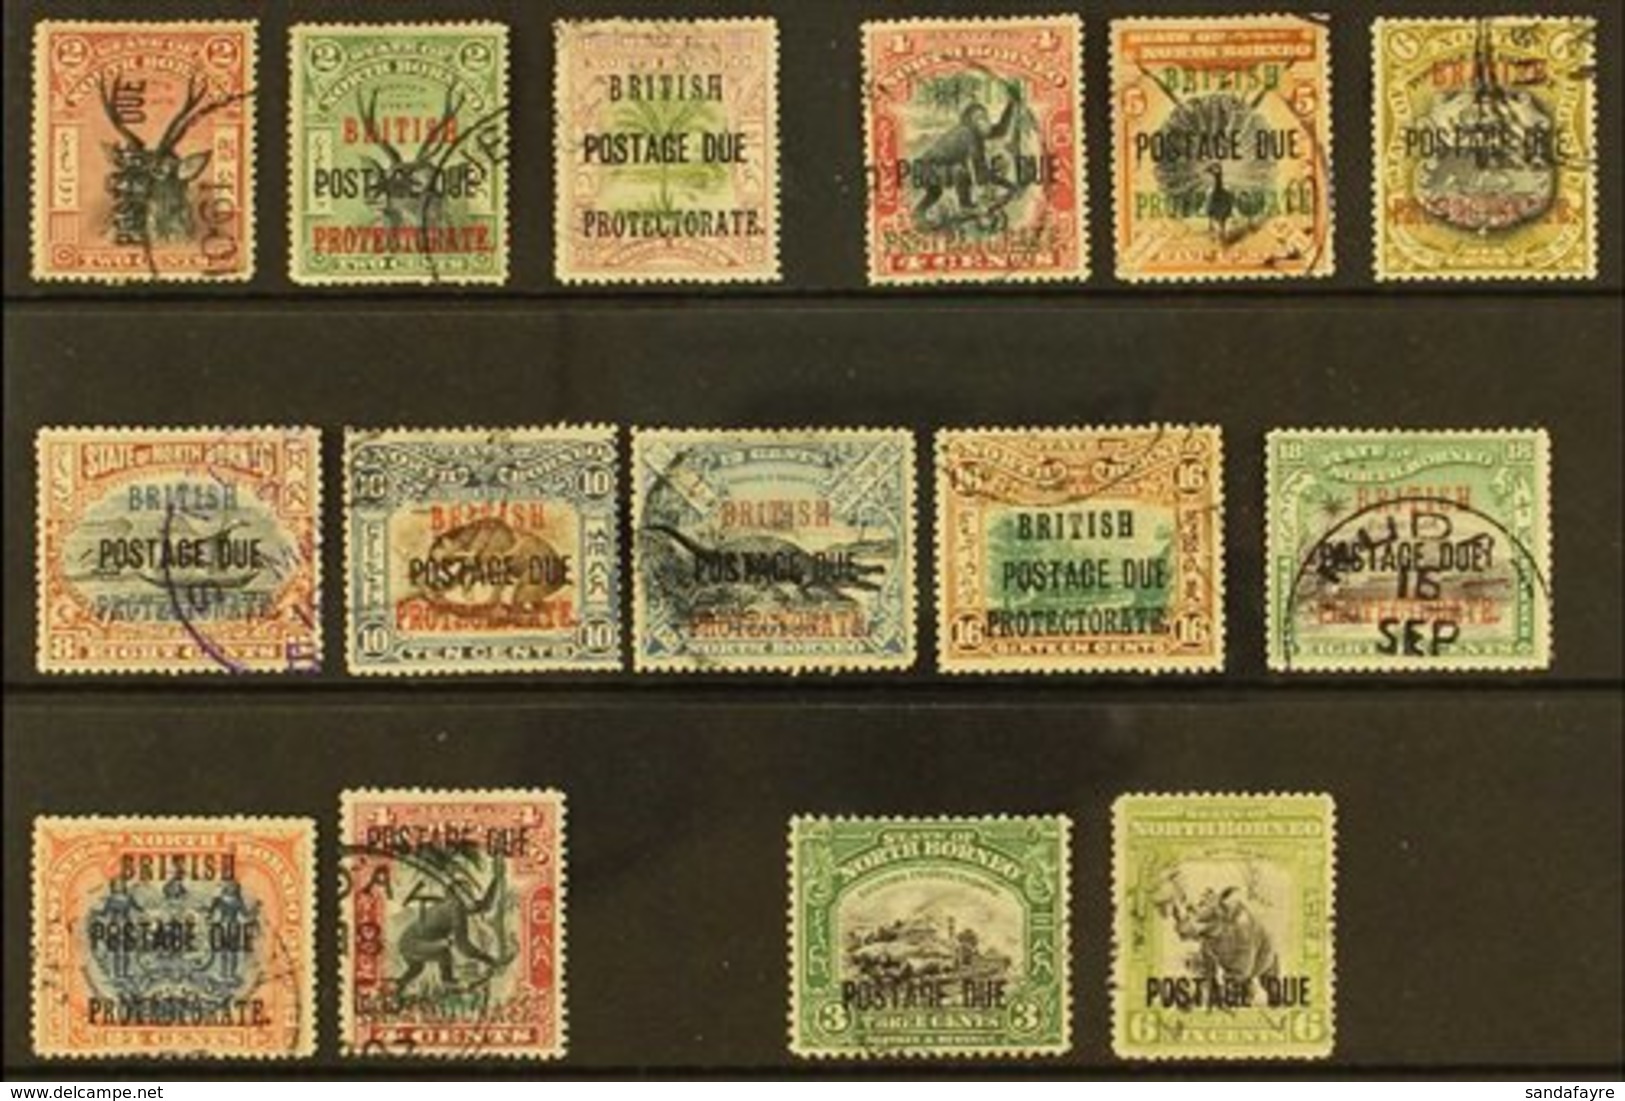 POSTAGE DUES 1897 - 1930 Fine Postally Used Selection With Cds Cancels Including 1902 Vals To 24c, 1906 4c Black And Car - North Borneo (...-1963)